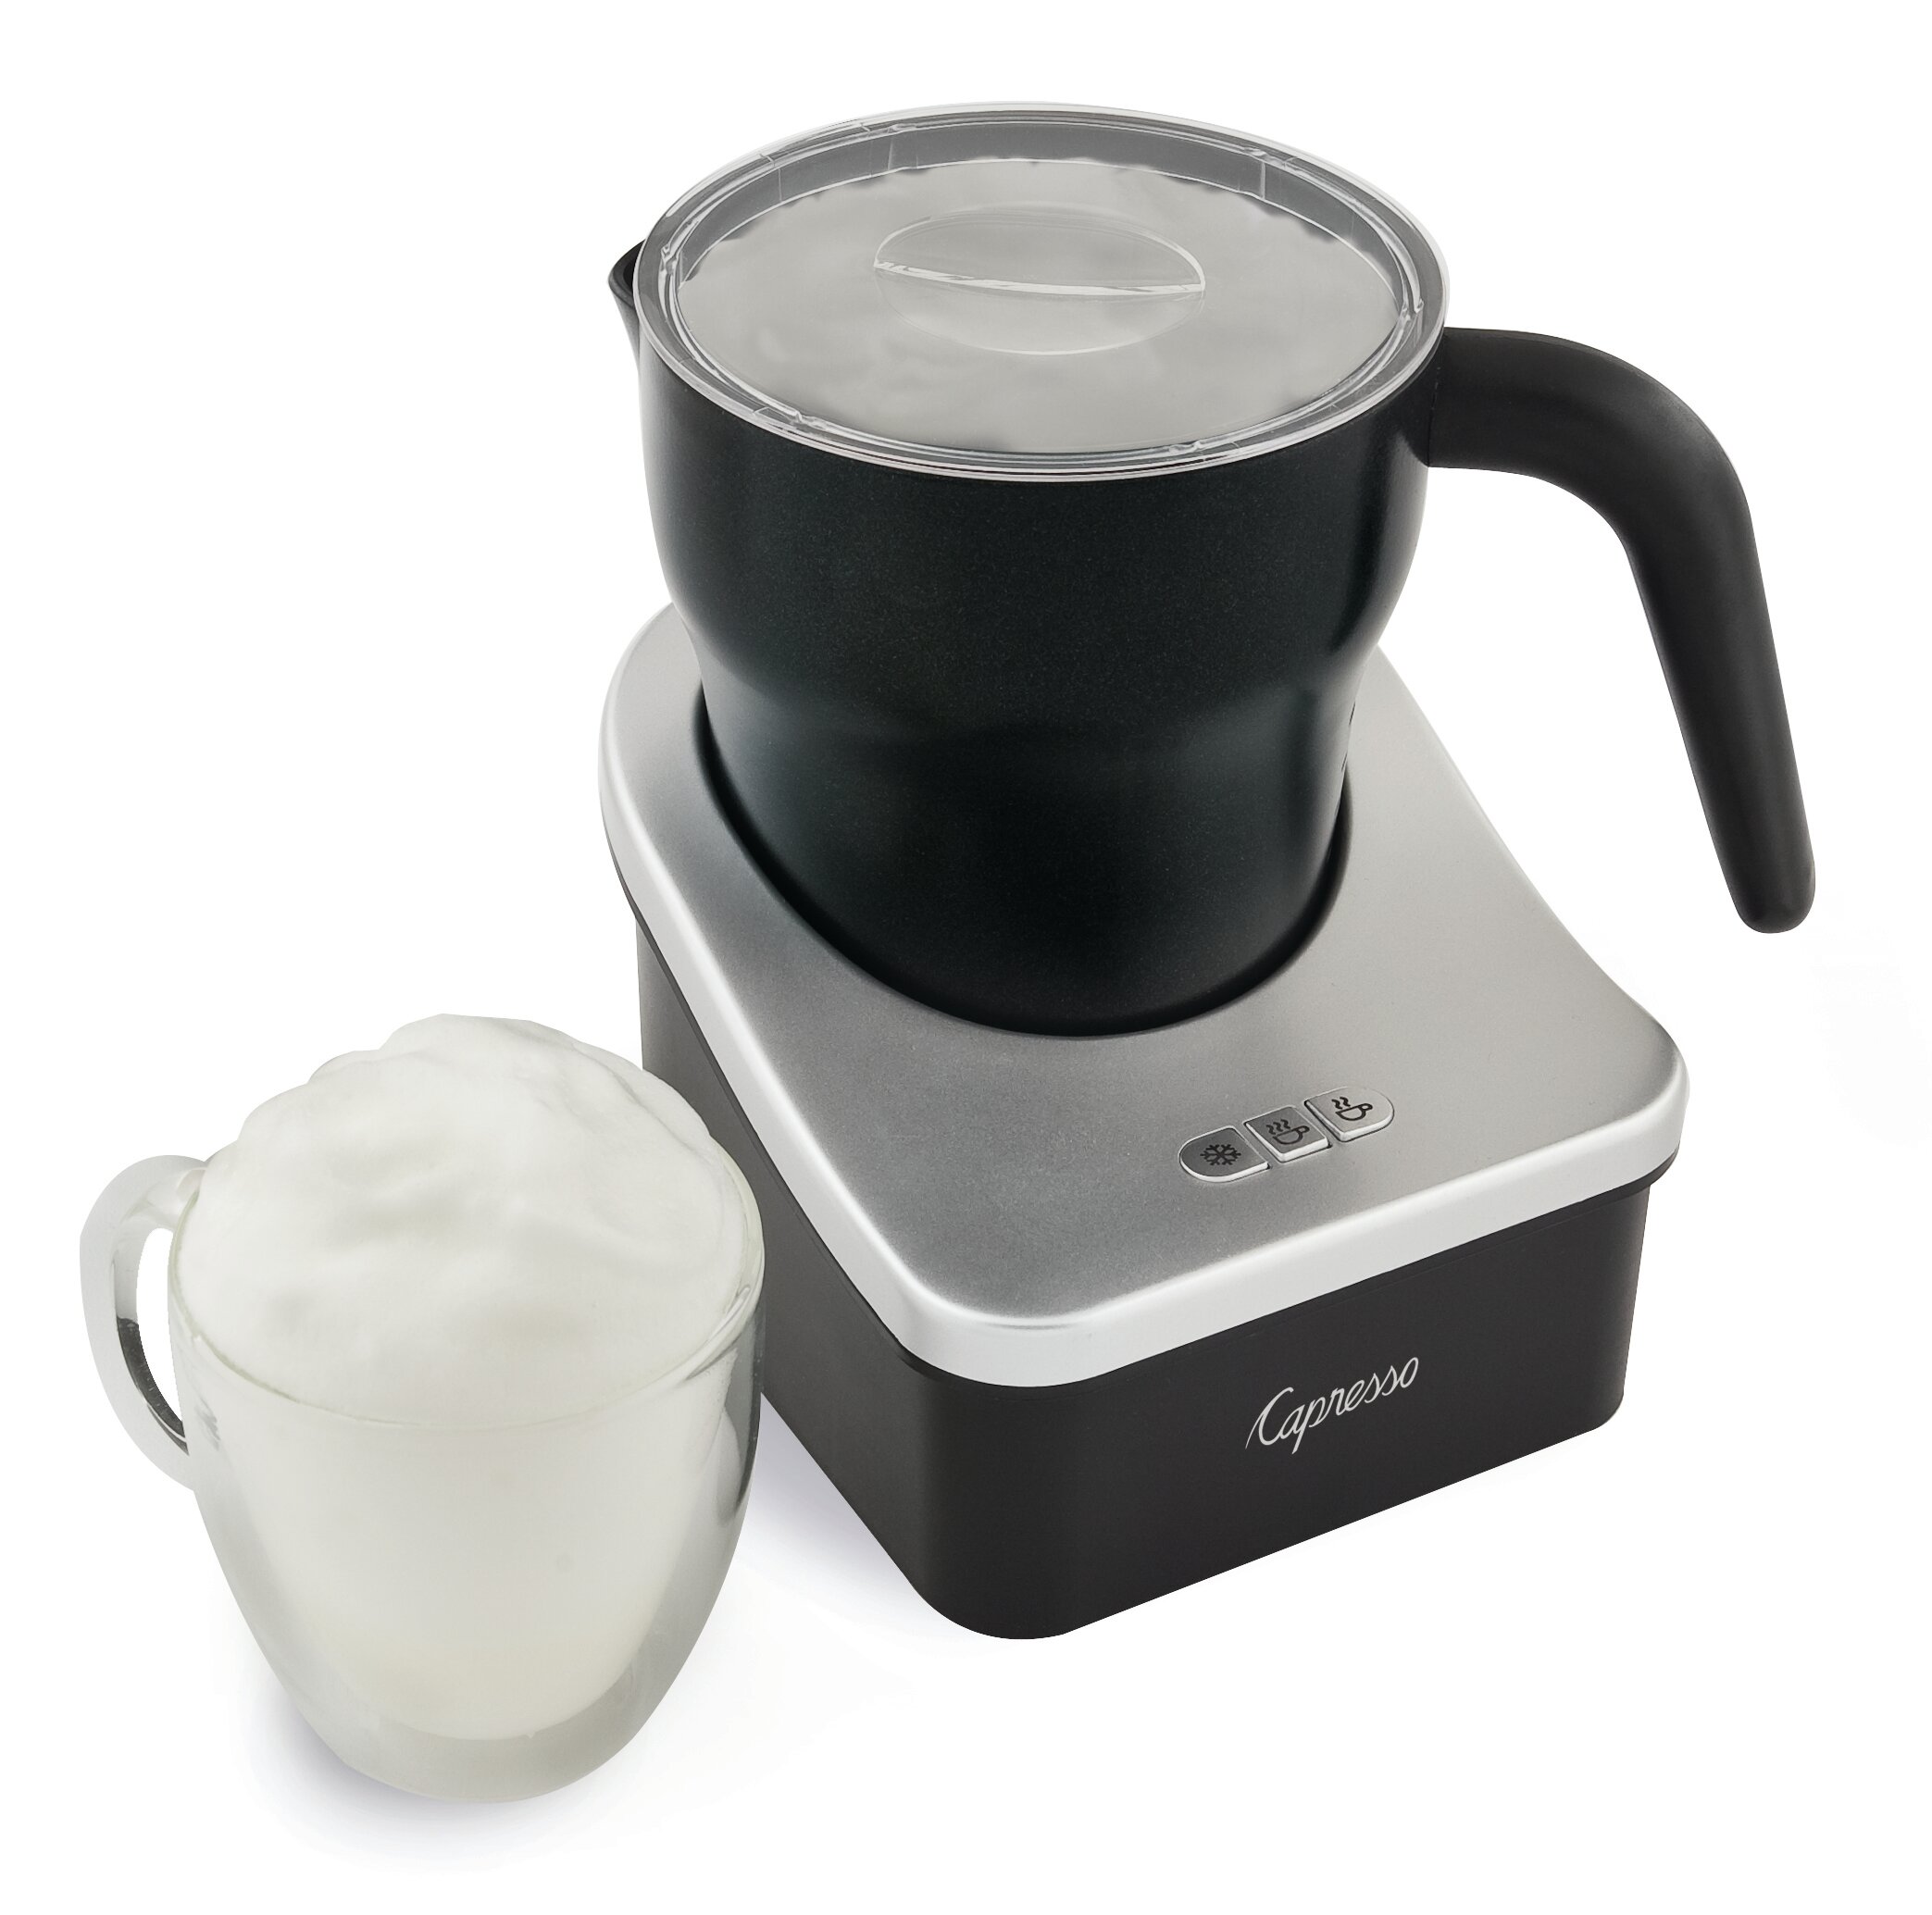 OVENTE 8 oz. Black Automatic Electric Milk Frother and Steamer Hot